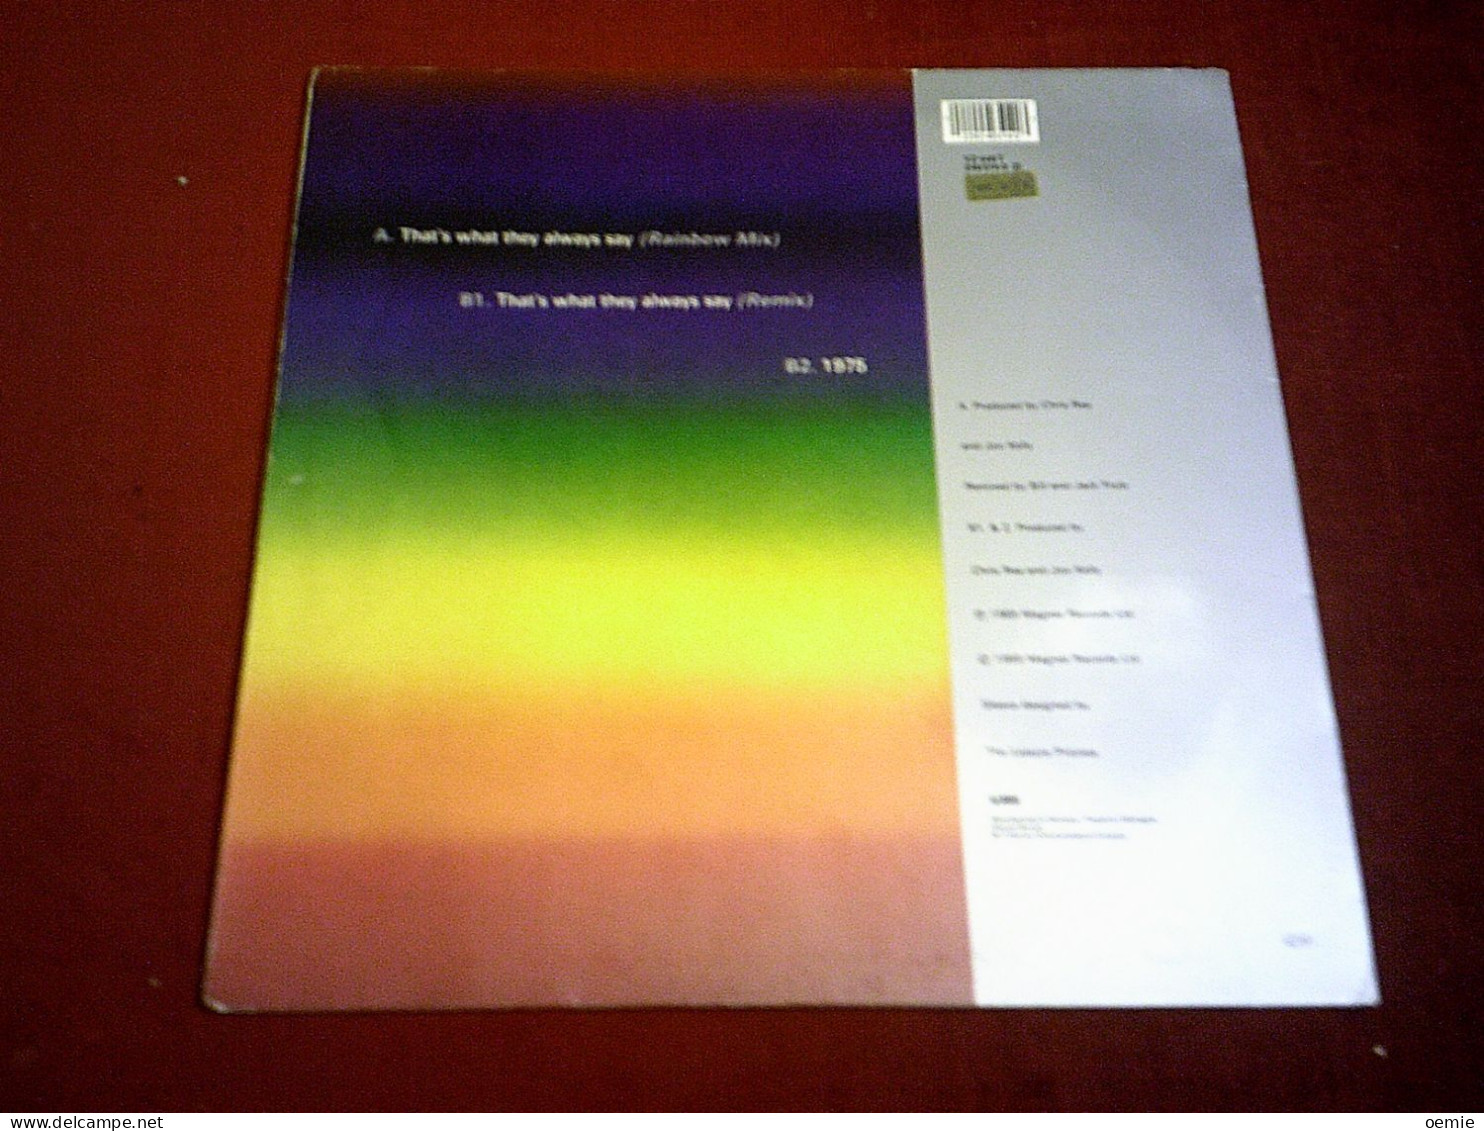 CHRIS REA   / THAT'S WHAT THEY ALWAYS SAY ( RAINBOW MIX ) - 45 T - Maxi-Single